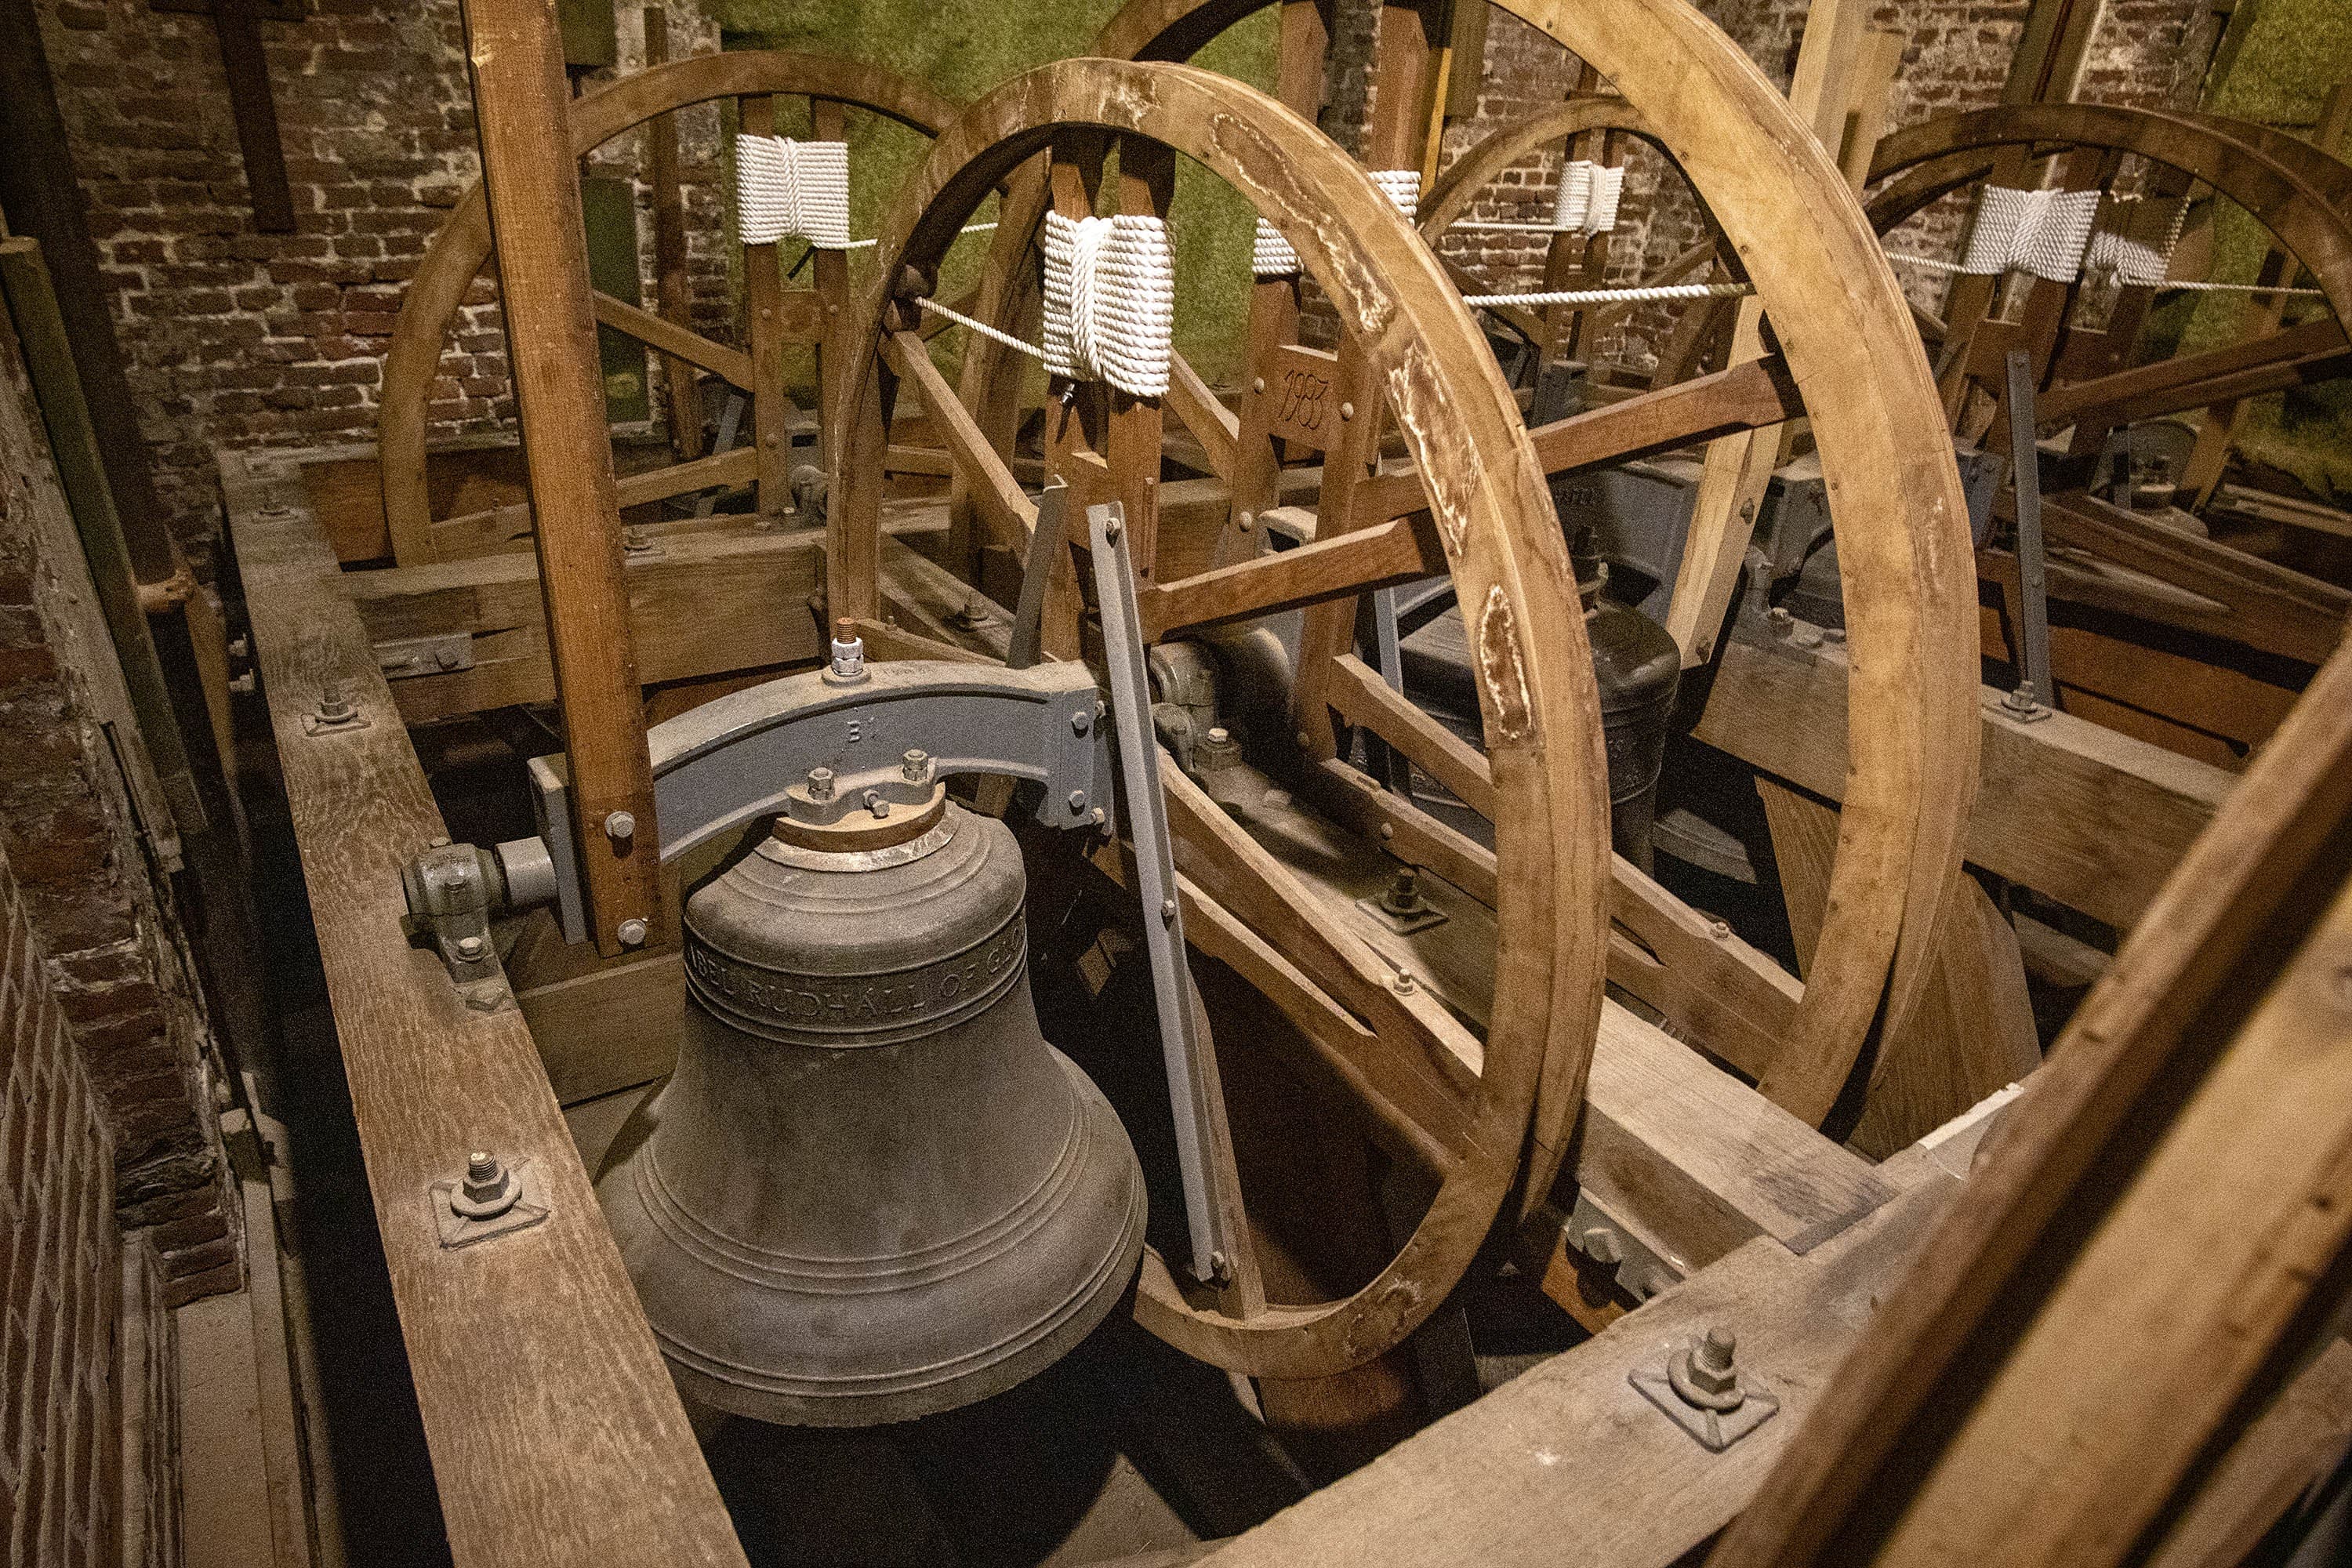 Ringing true: History and community resonate in Long Island's church bells  - Newsday